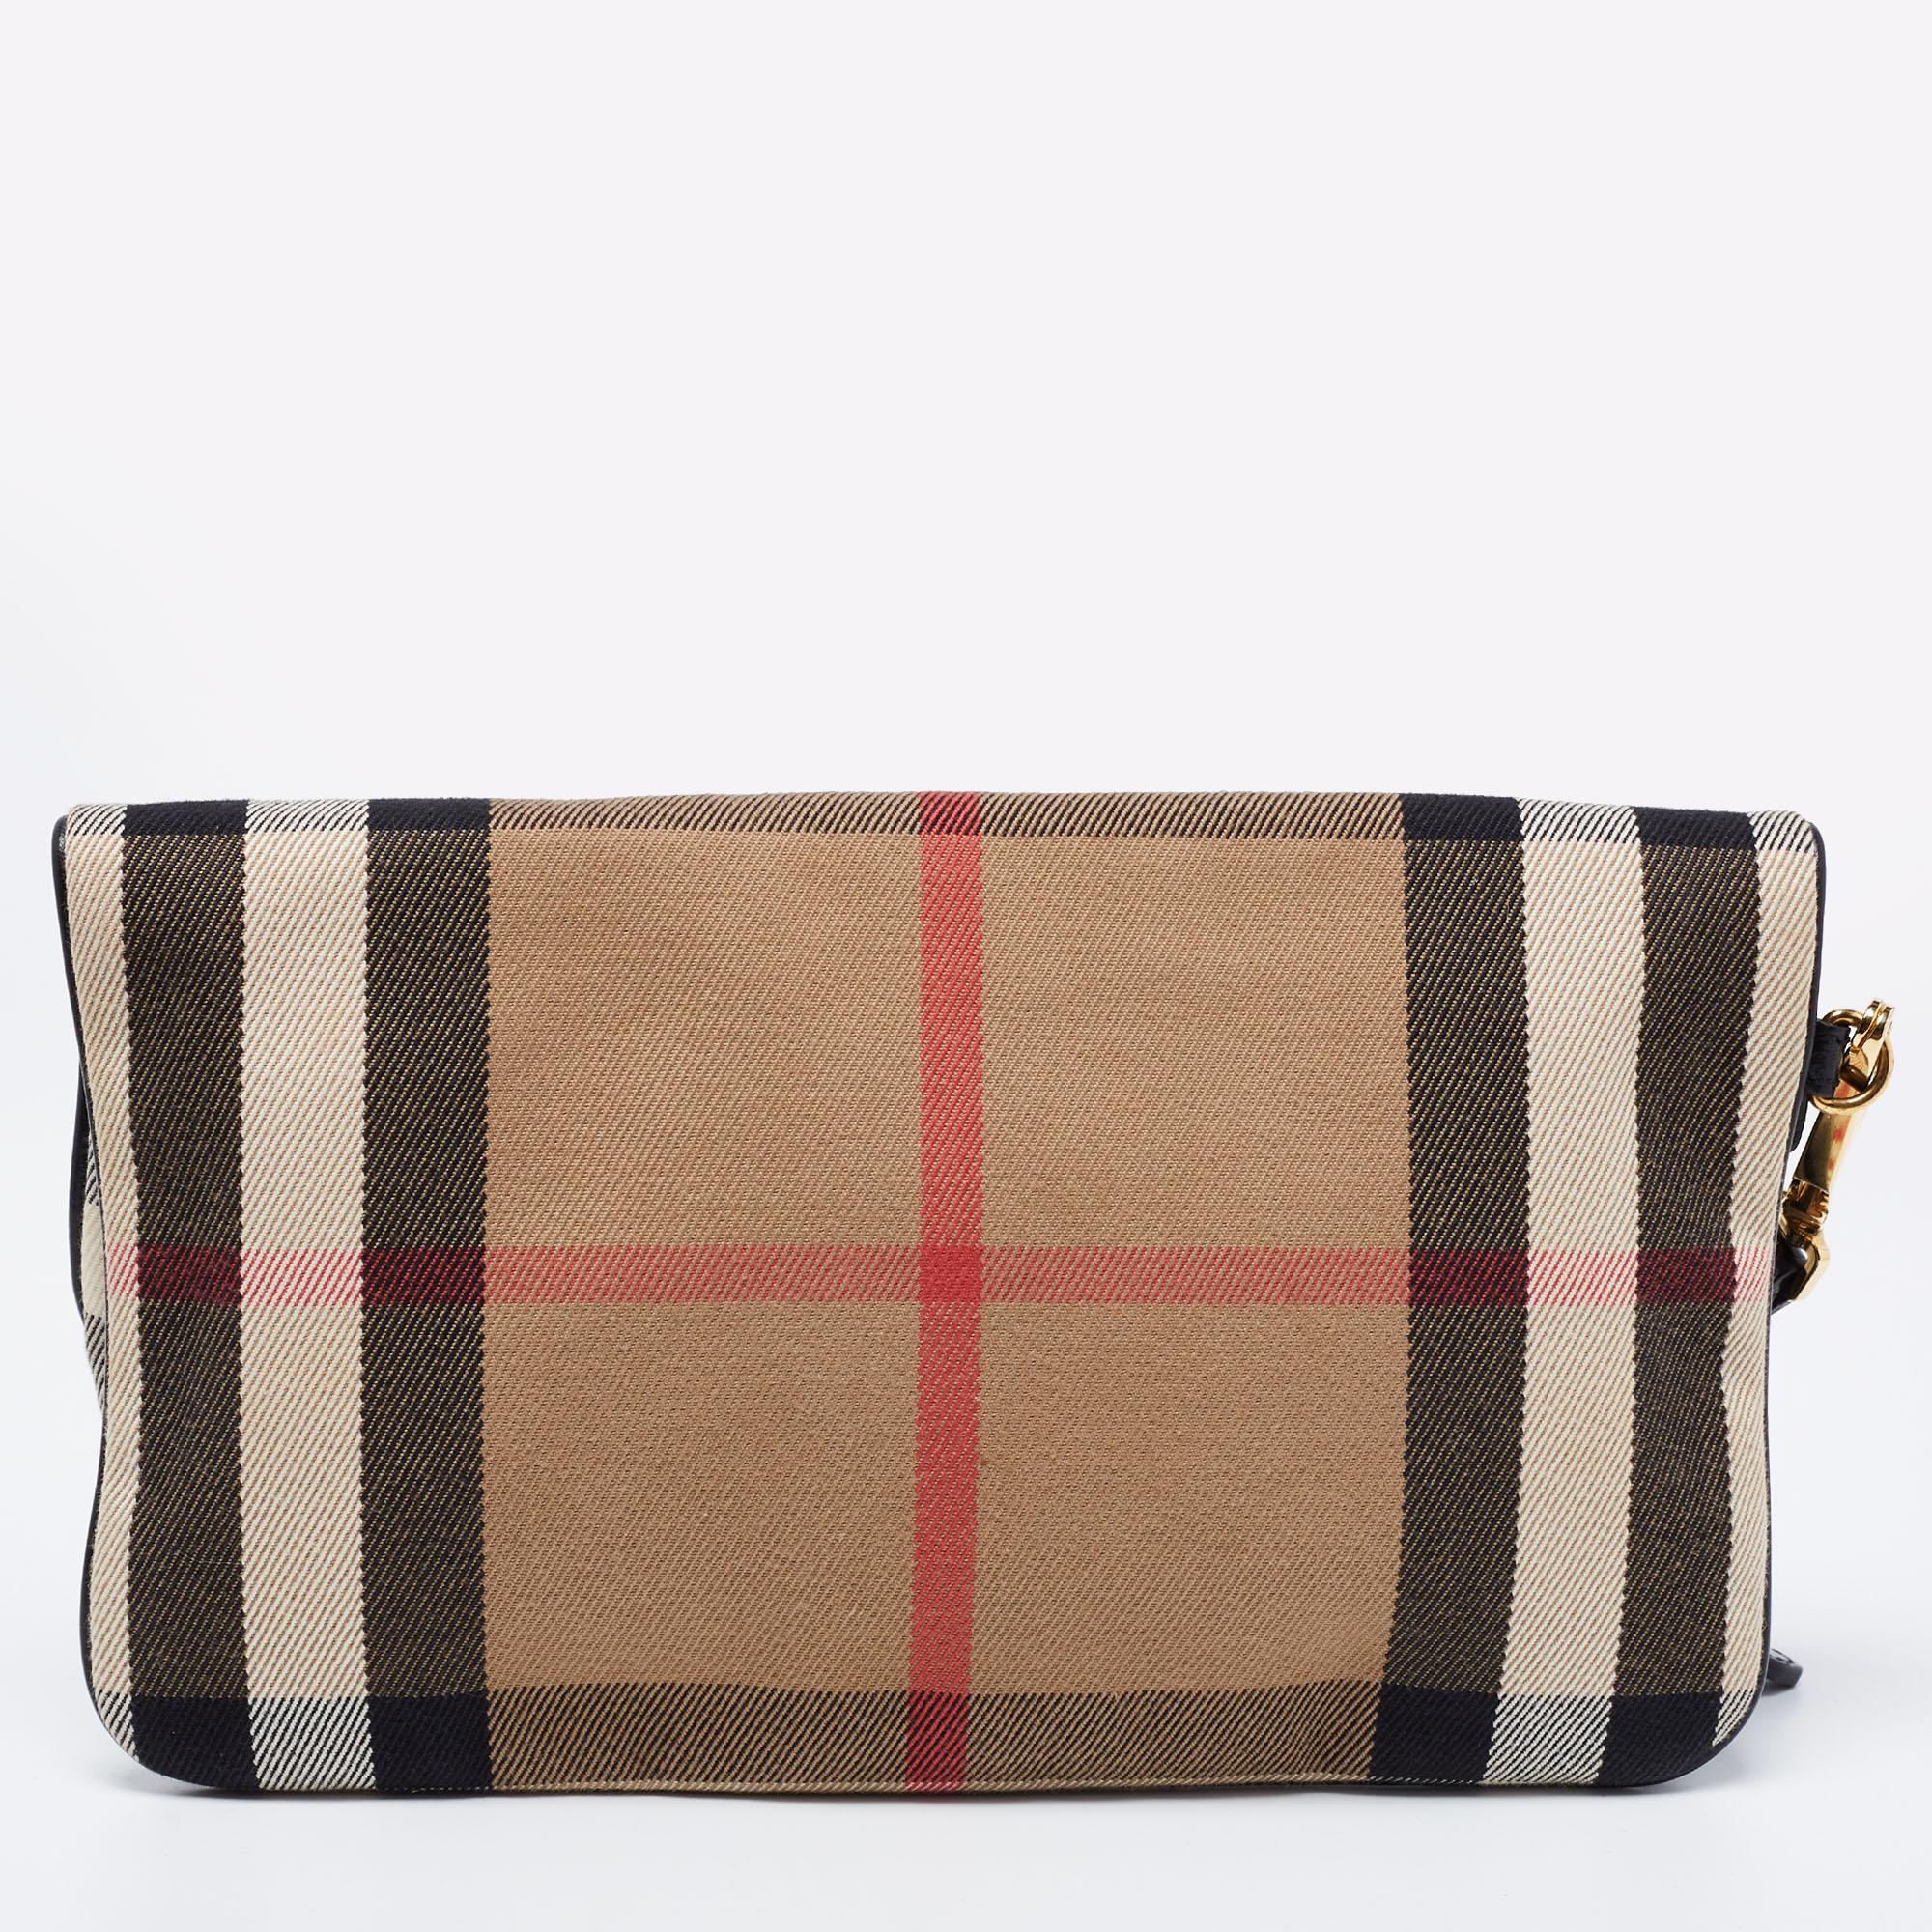 A clutch like this one from Burberry will be a handy companion. Crafted using House Check canvas and leather, this clutch is detailed with gold-tone hardware and a wristlet strap. The zip closure opens to reveal a fabric interior.

